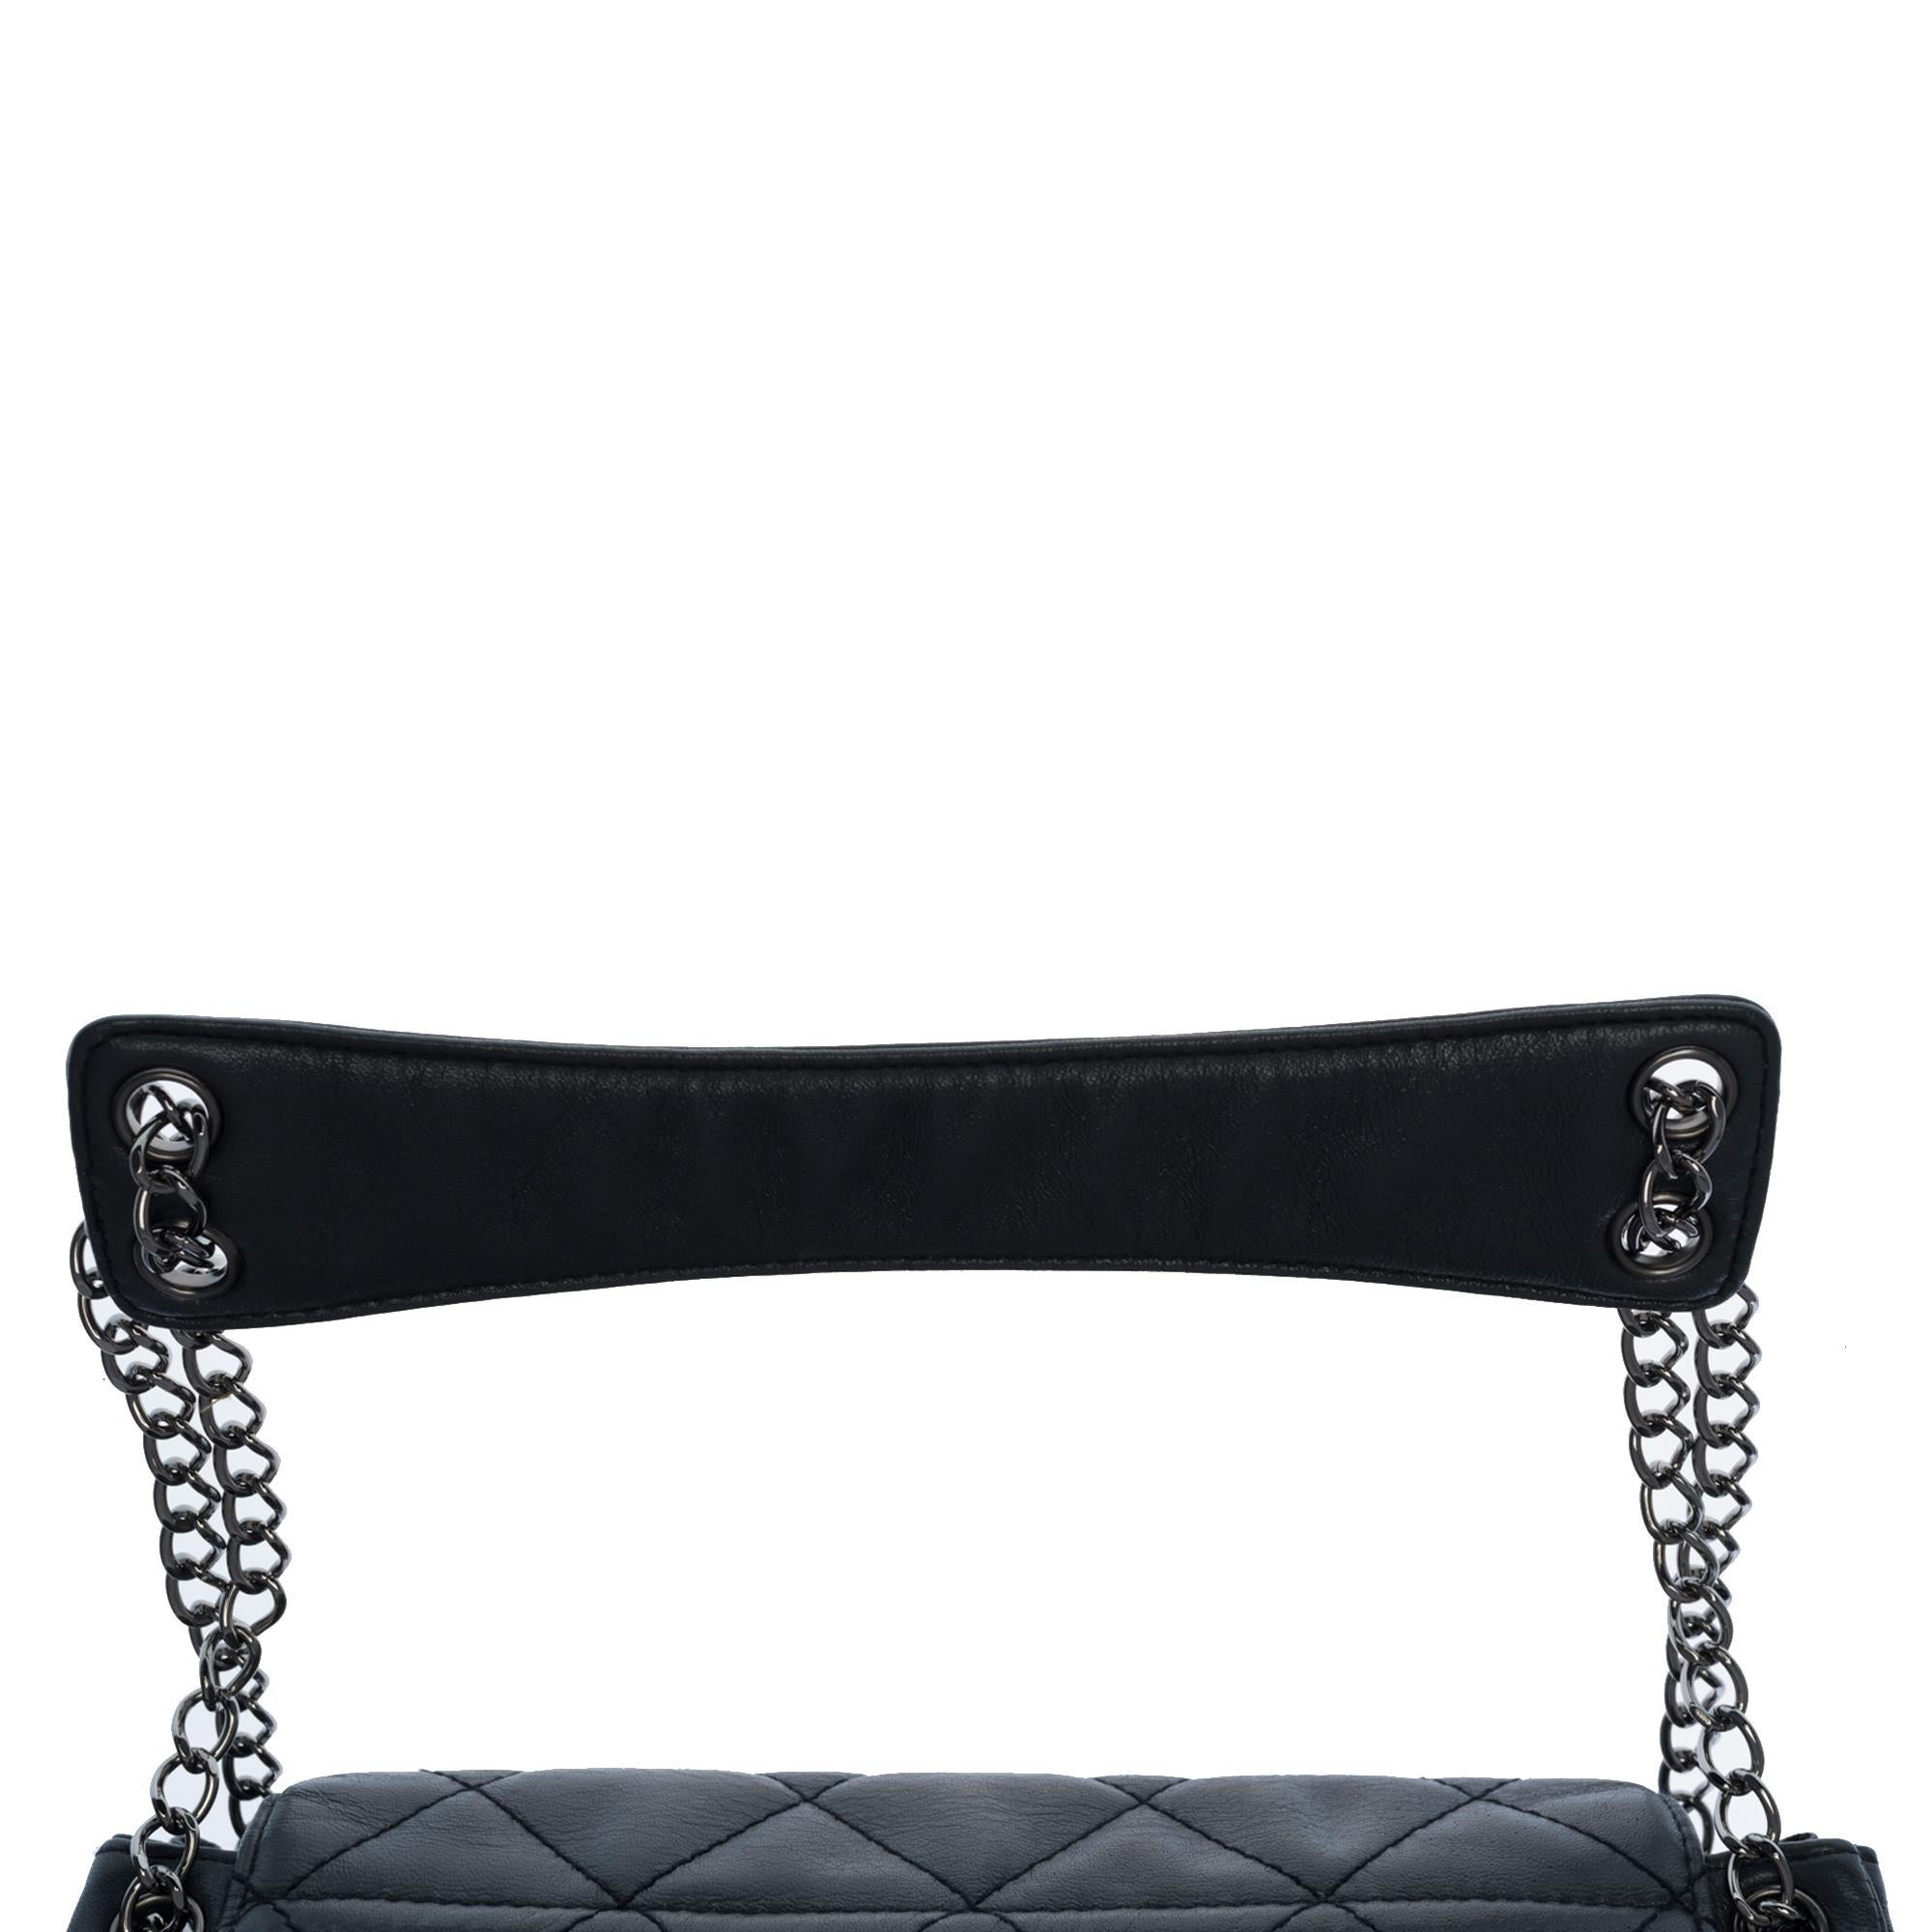 Chanel Classic Flap shoulder bag in grey quilted leather, SHW 1